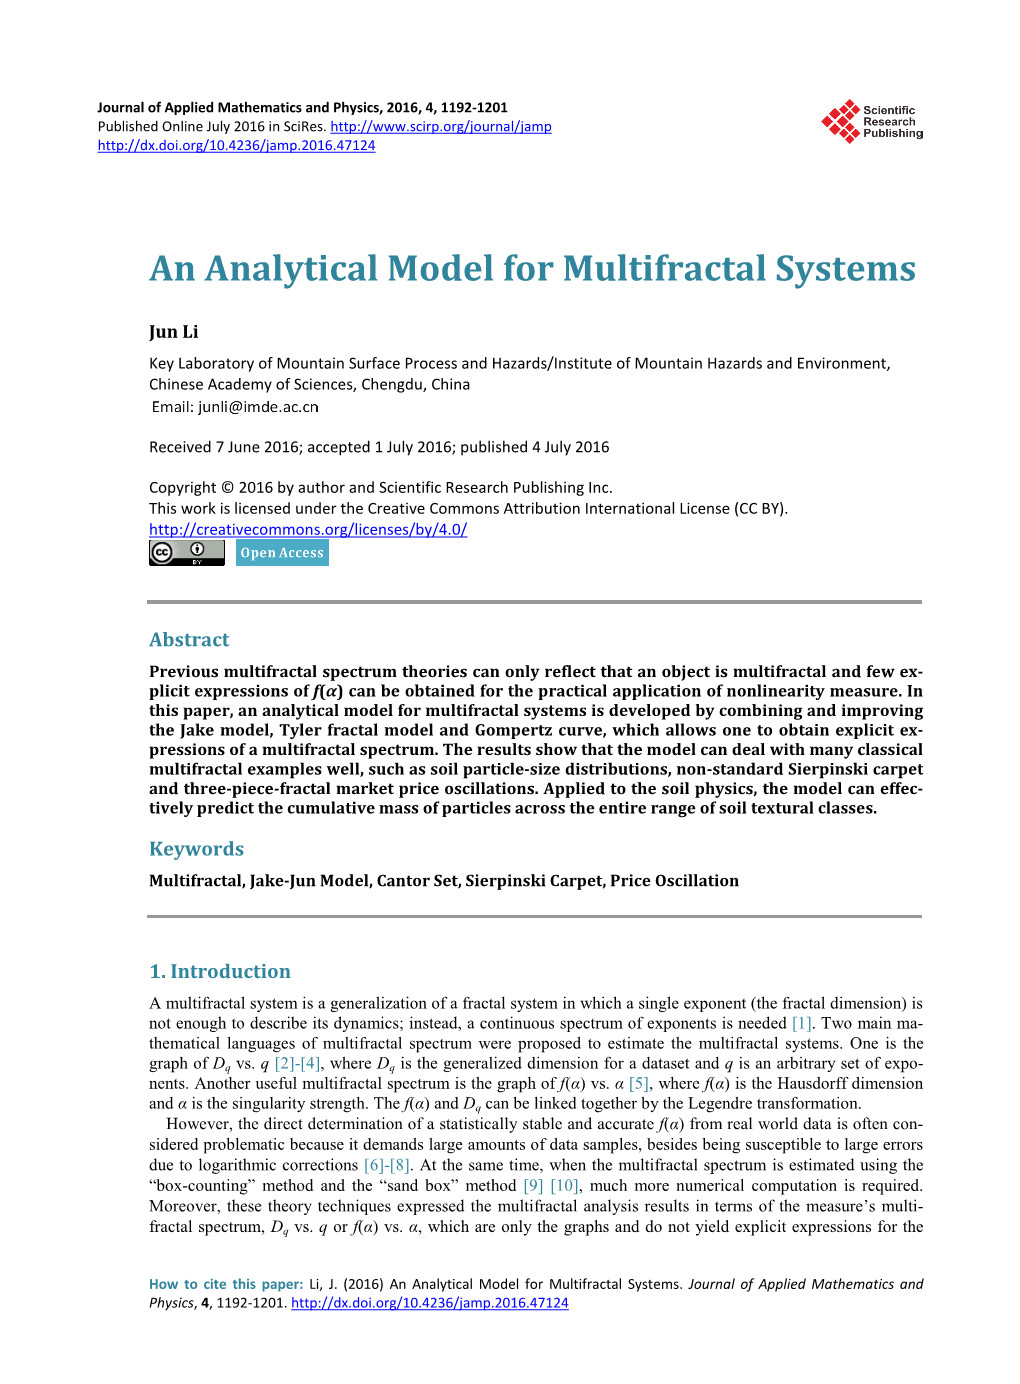 An Analytical Model for Multifractal Systems